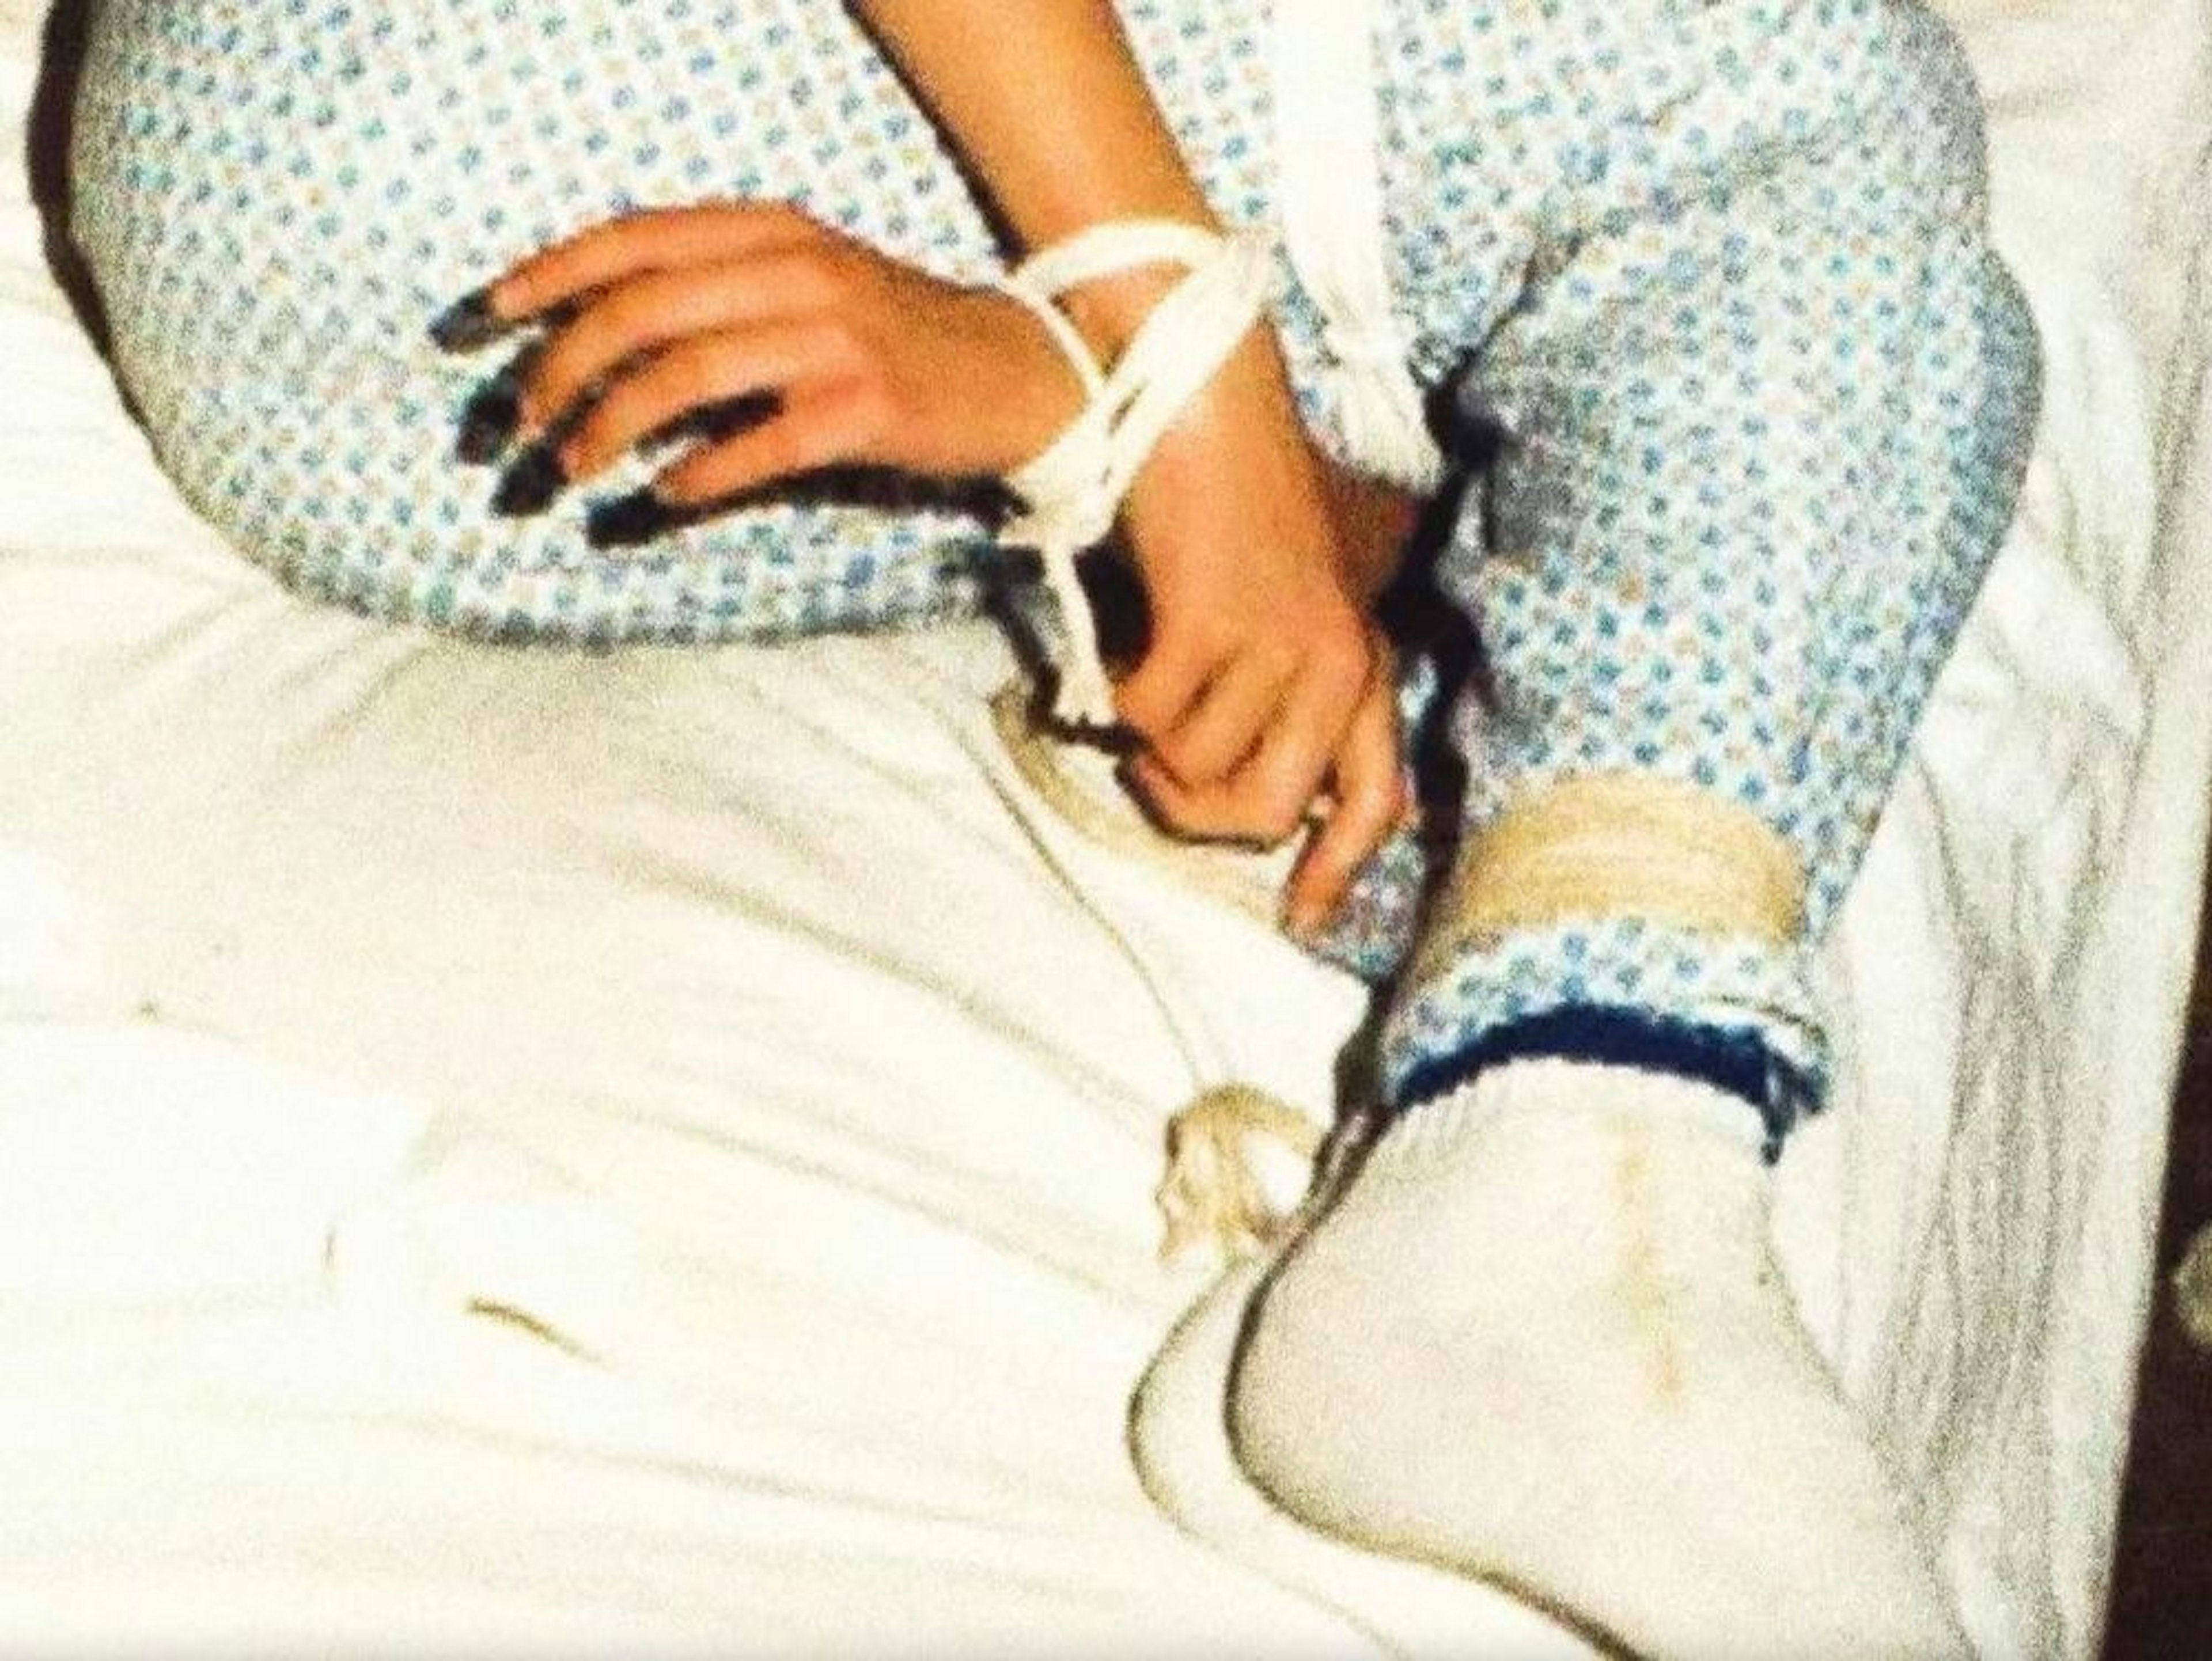 film still showing a person's hands and legs, all tied with rope, while they're lying on a white bedsheet